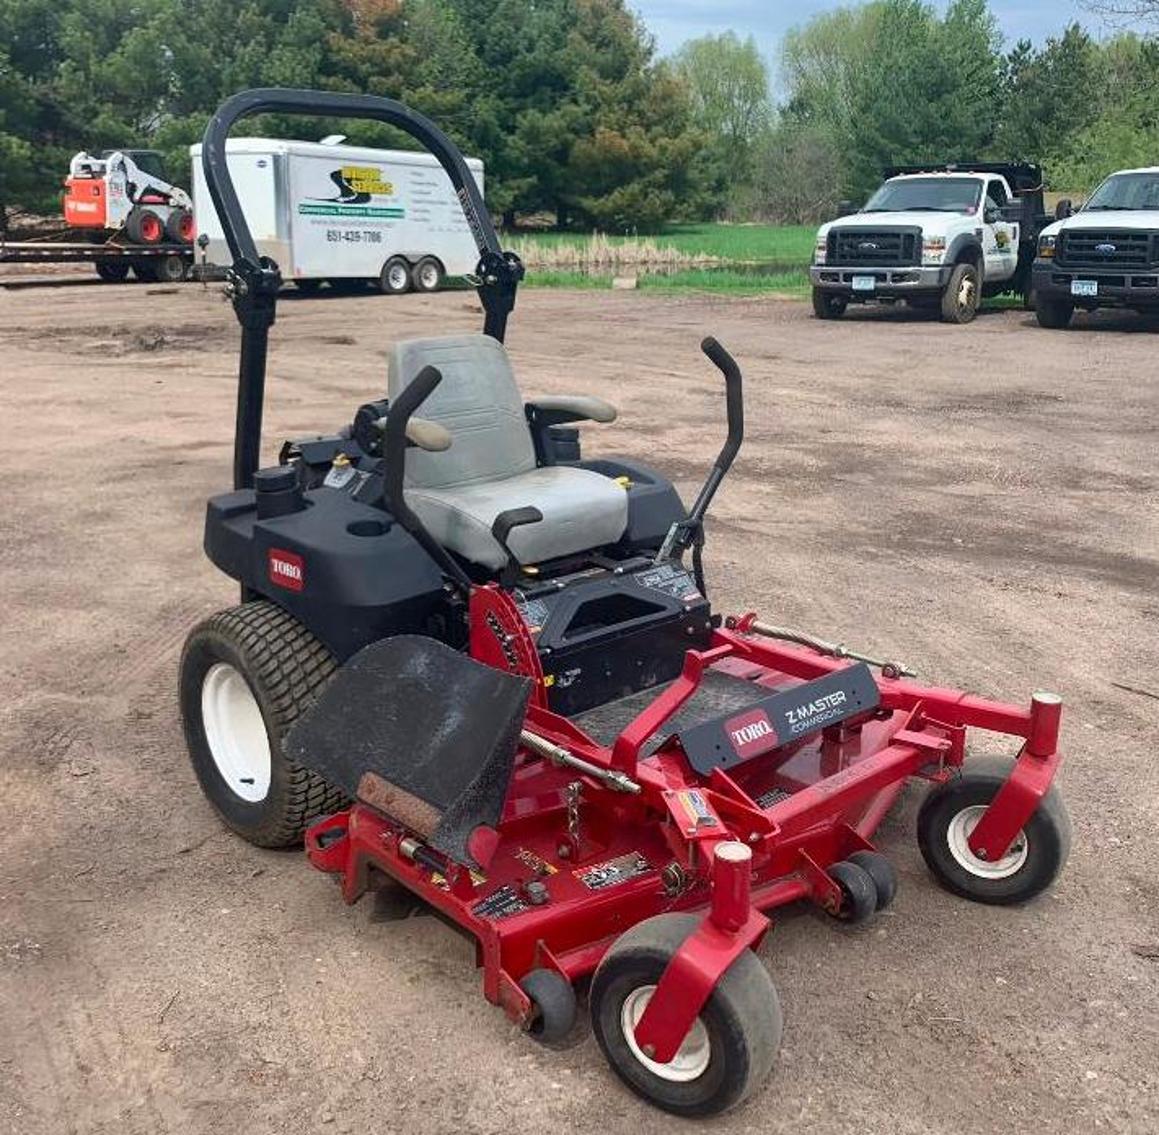 Toro Z Master Lawn Mower, Quincy Air Compressor, Bobcat Sweepers & More